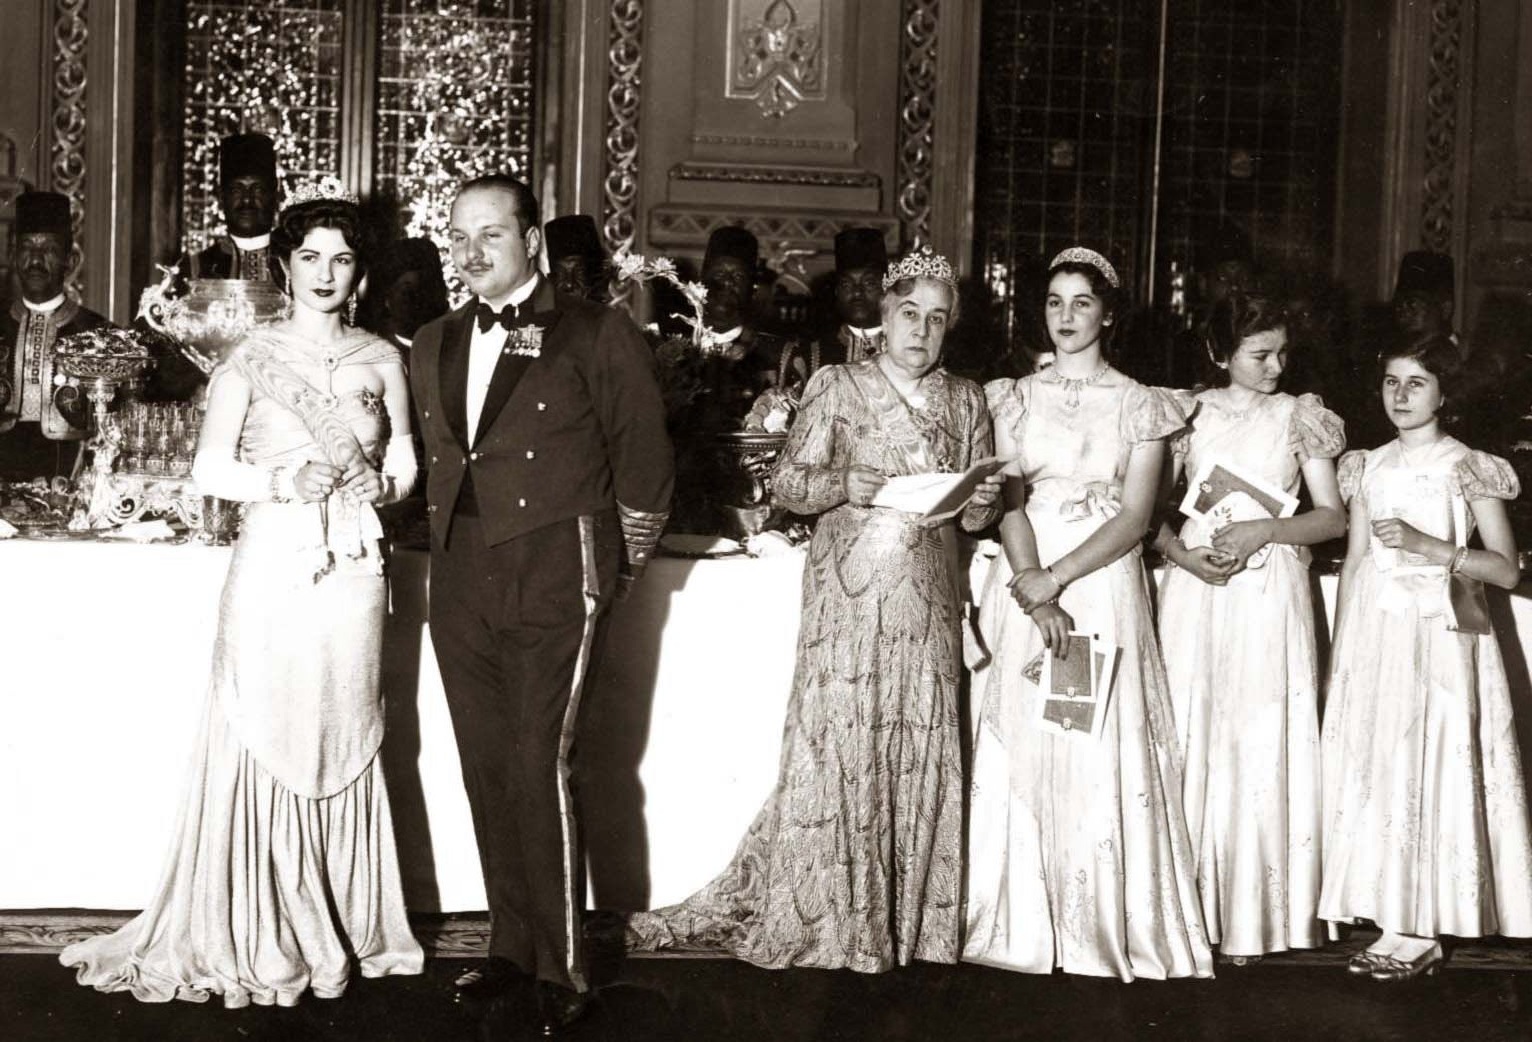 http://upload.wikimedia.org/wikipedia/commons/a/a1/ModernEgypt,_Farouk_I%27s_Birthday_Parties,_DHP13655-27-8_01.jpg